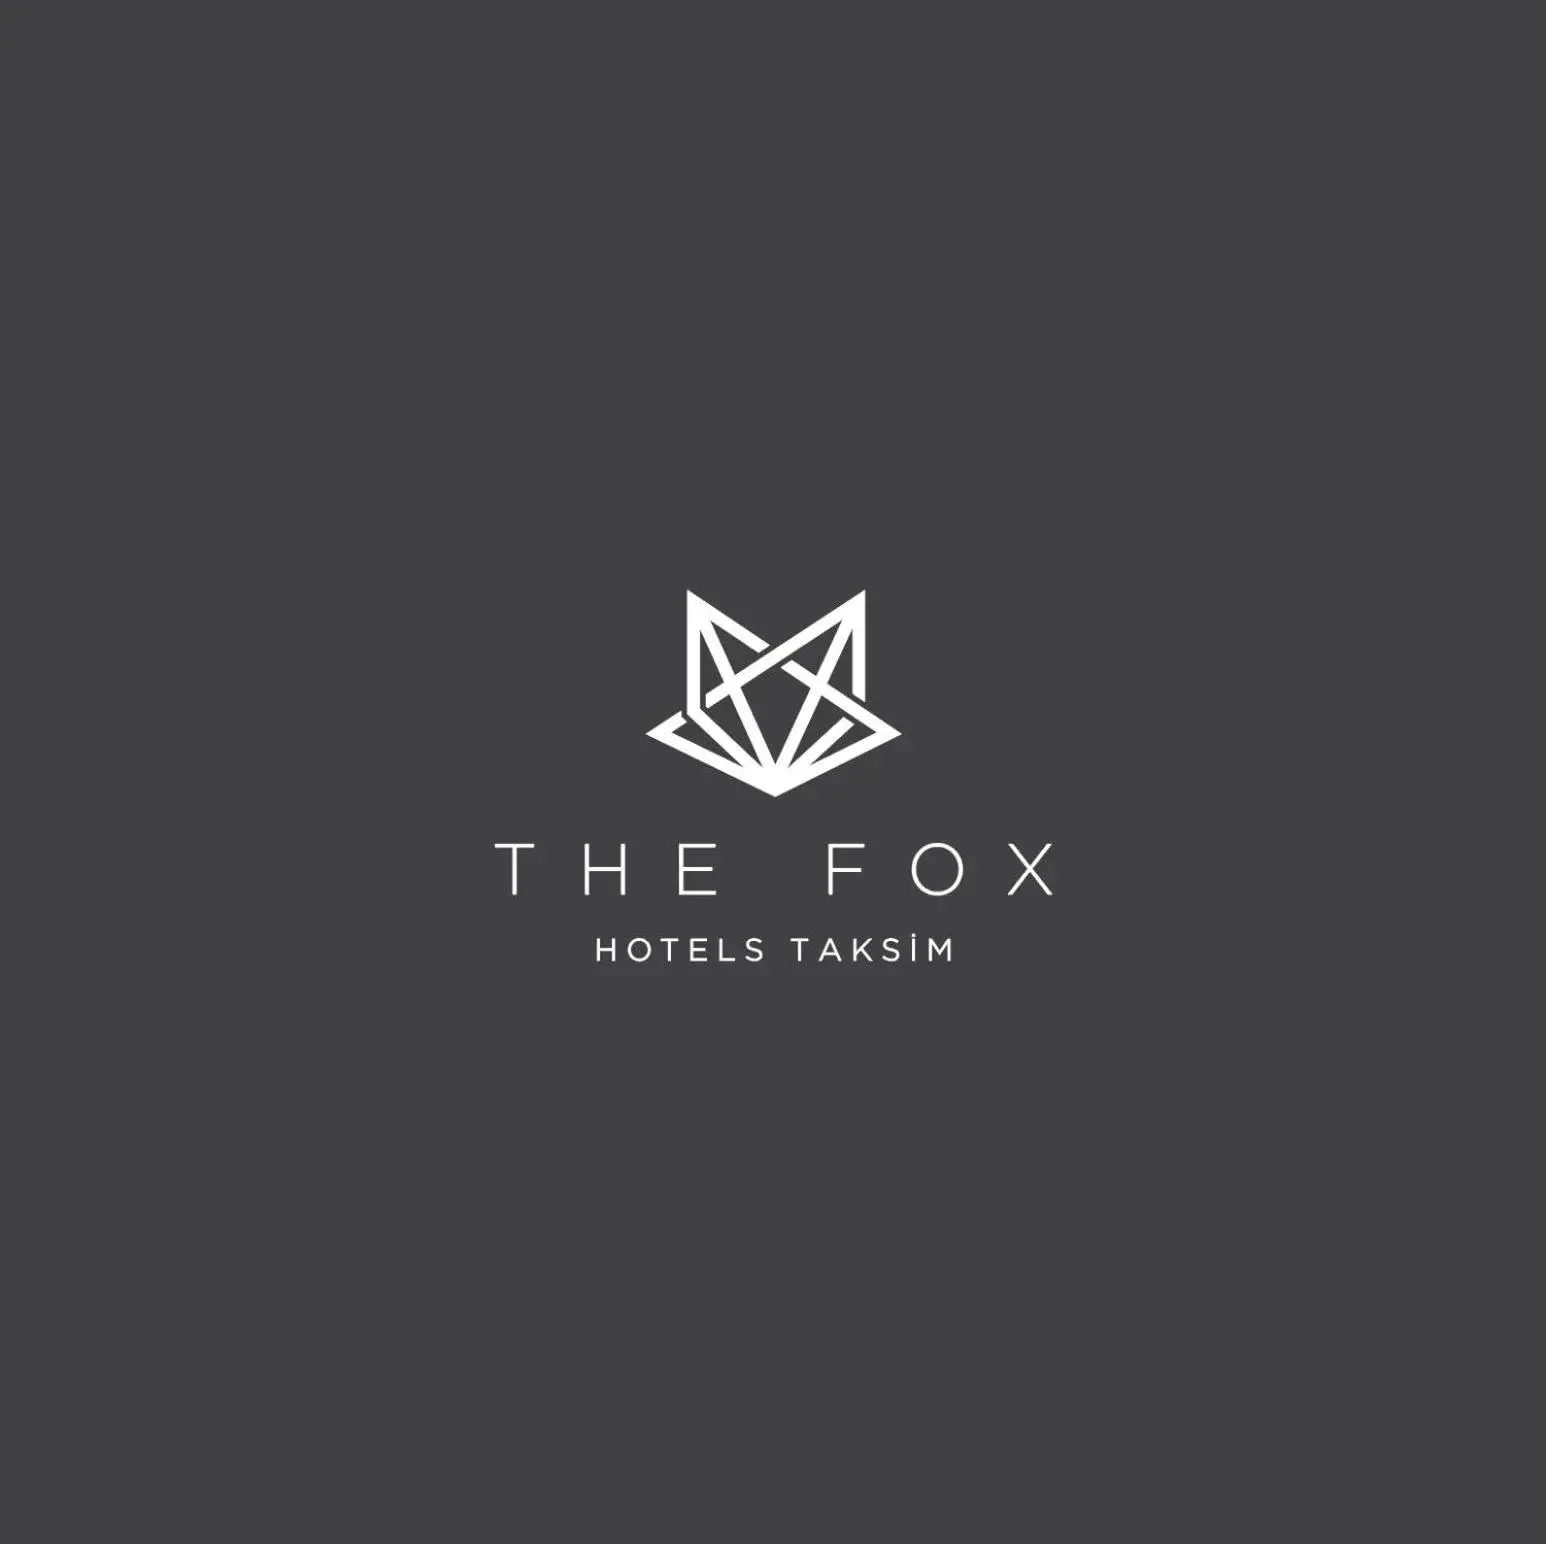 Logo/Certificate/Sign, Property Logo/Sign in The Fox Hotel